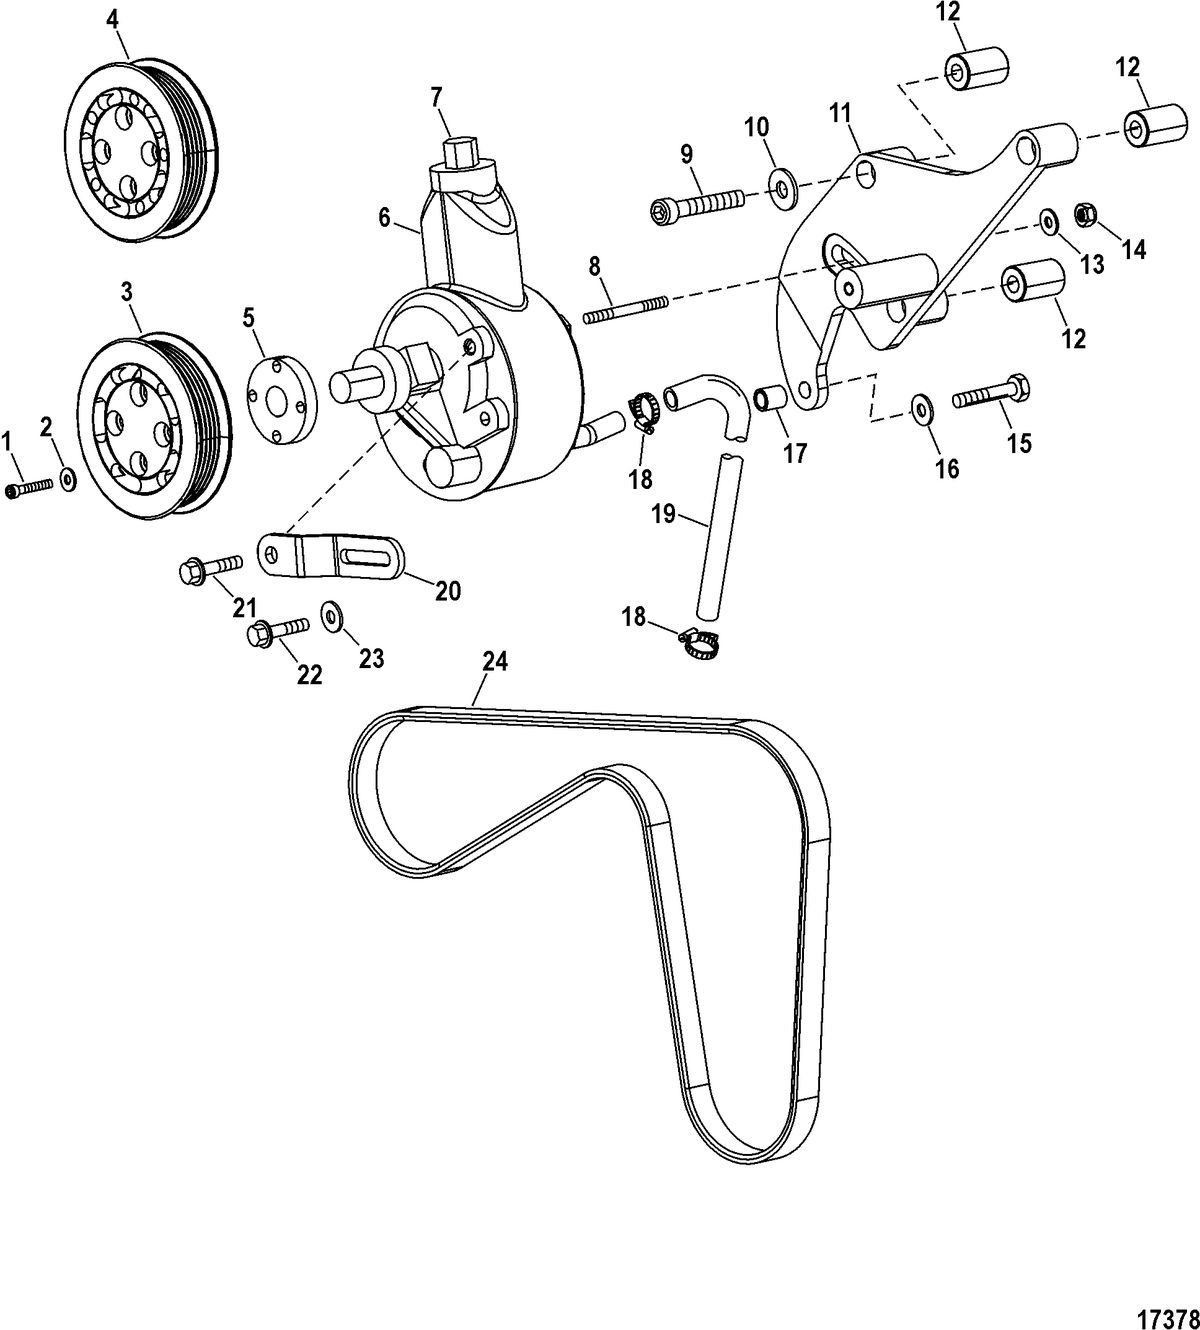 RACE STERNDRIVE 1075 SCI Power-Assisted Steering Components(Design I)